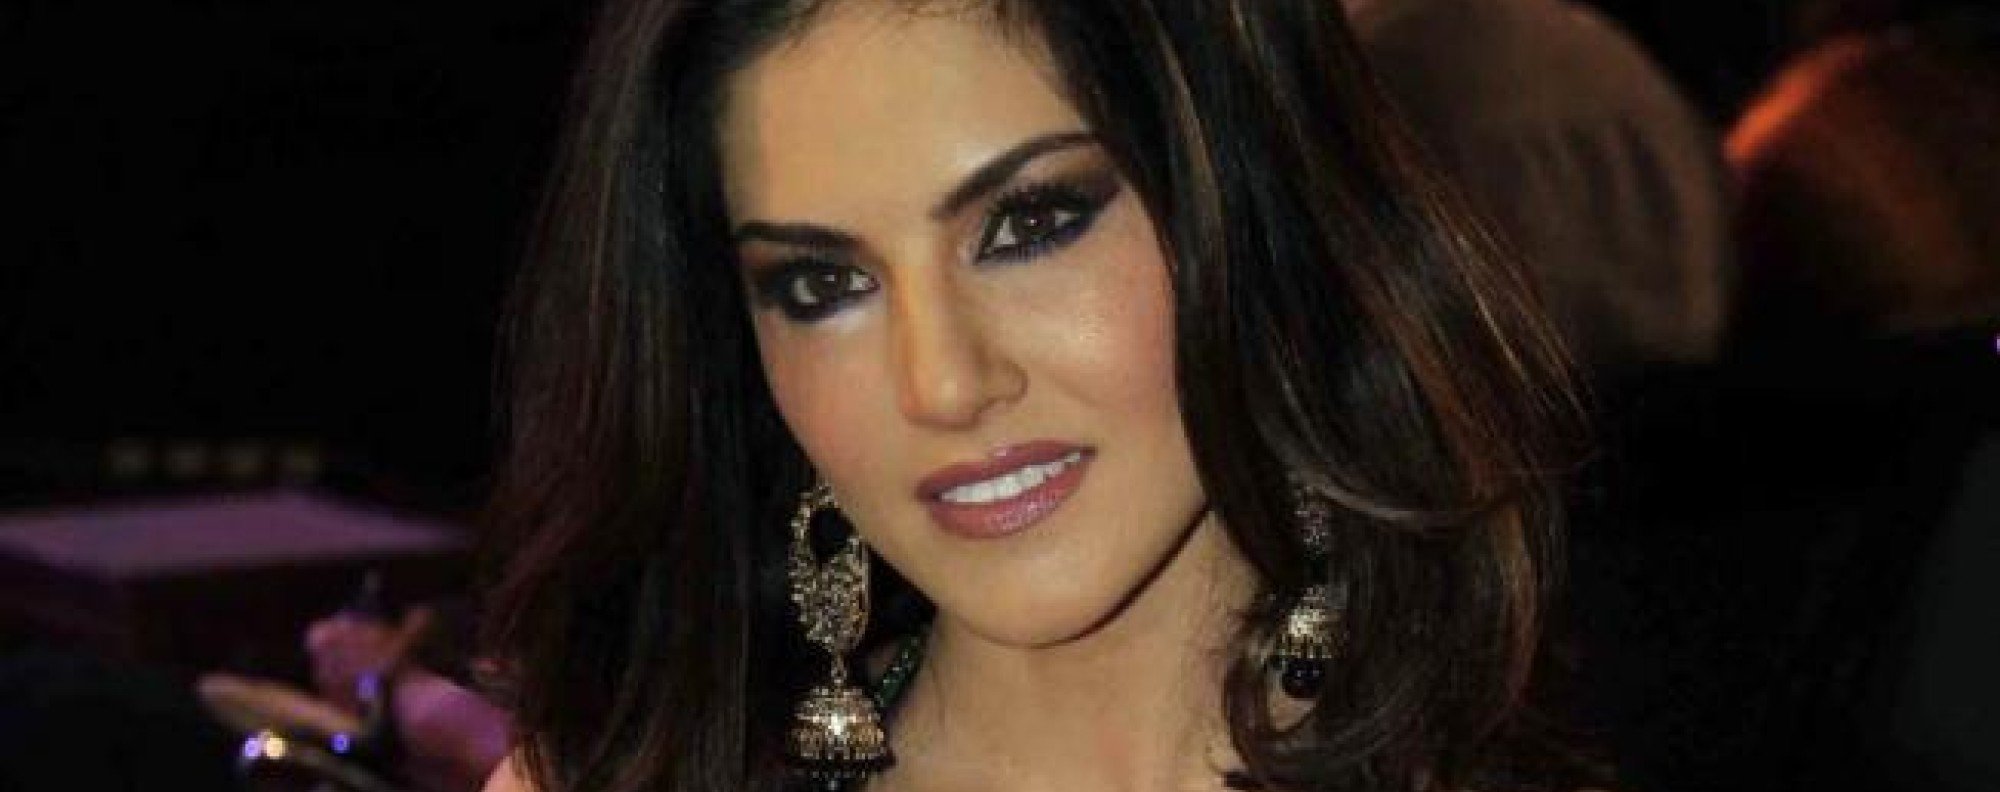 Xx Rape Video - Rape crisis in India leads to calls for porn star Sunny Leone to be jailed  | South China Morning Post